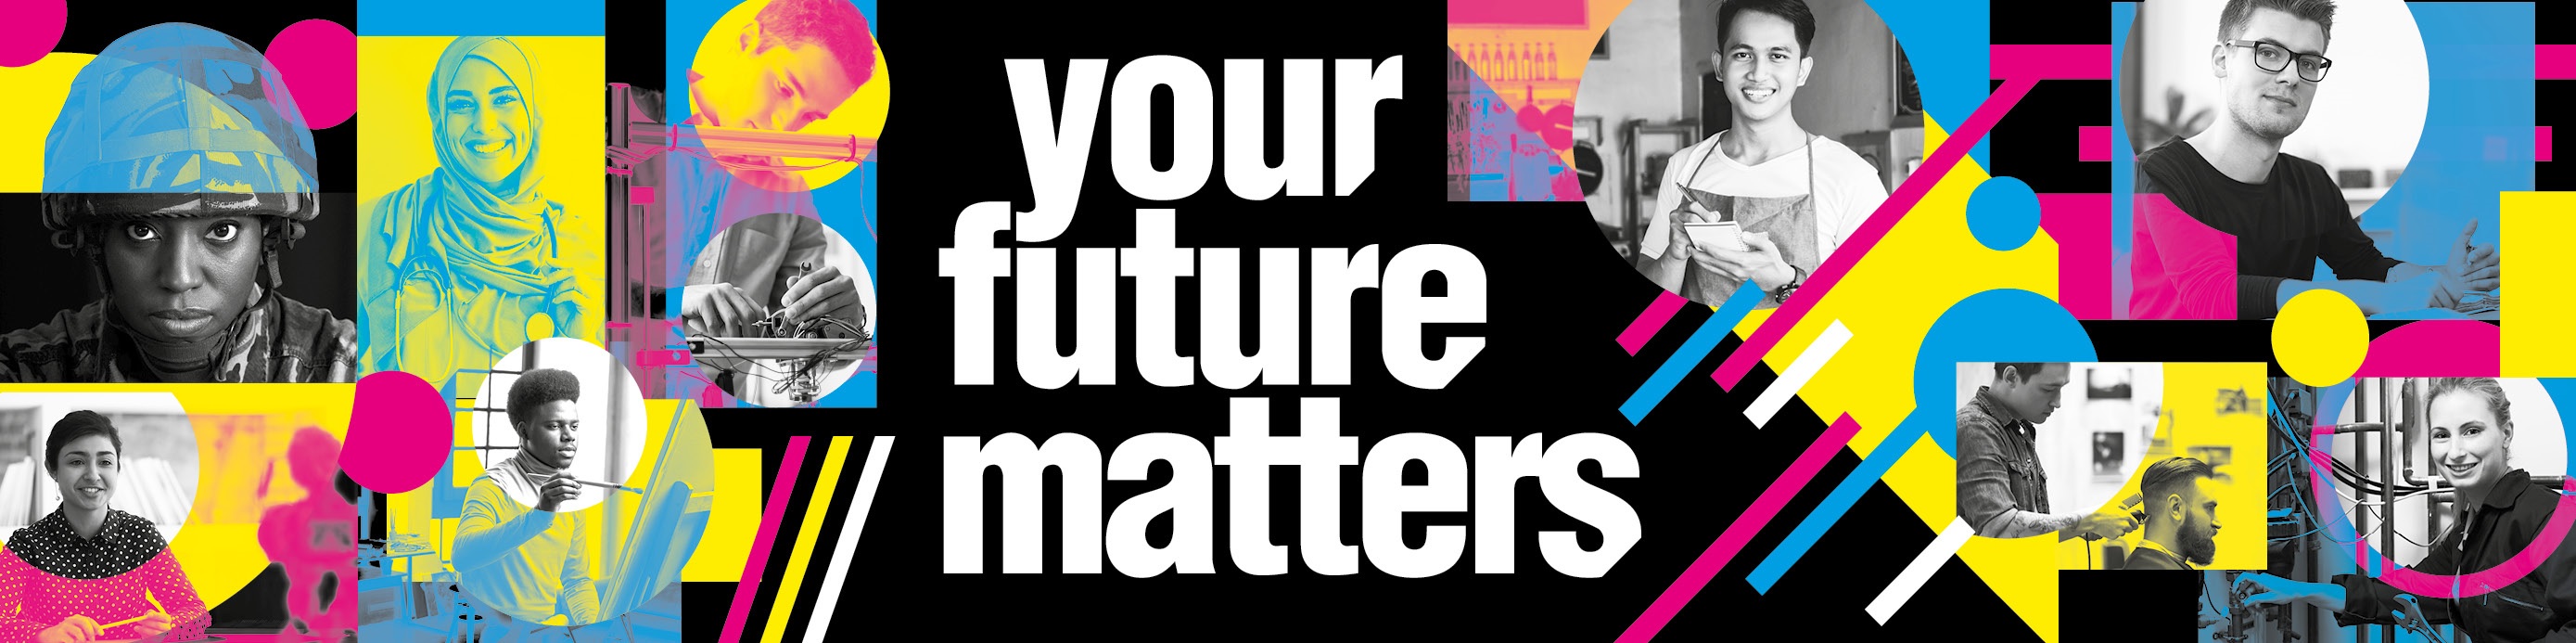 Your Future Matters banner image